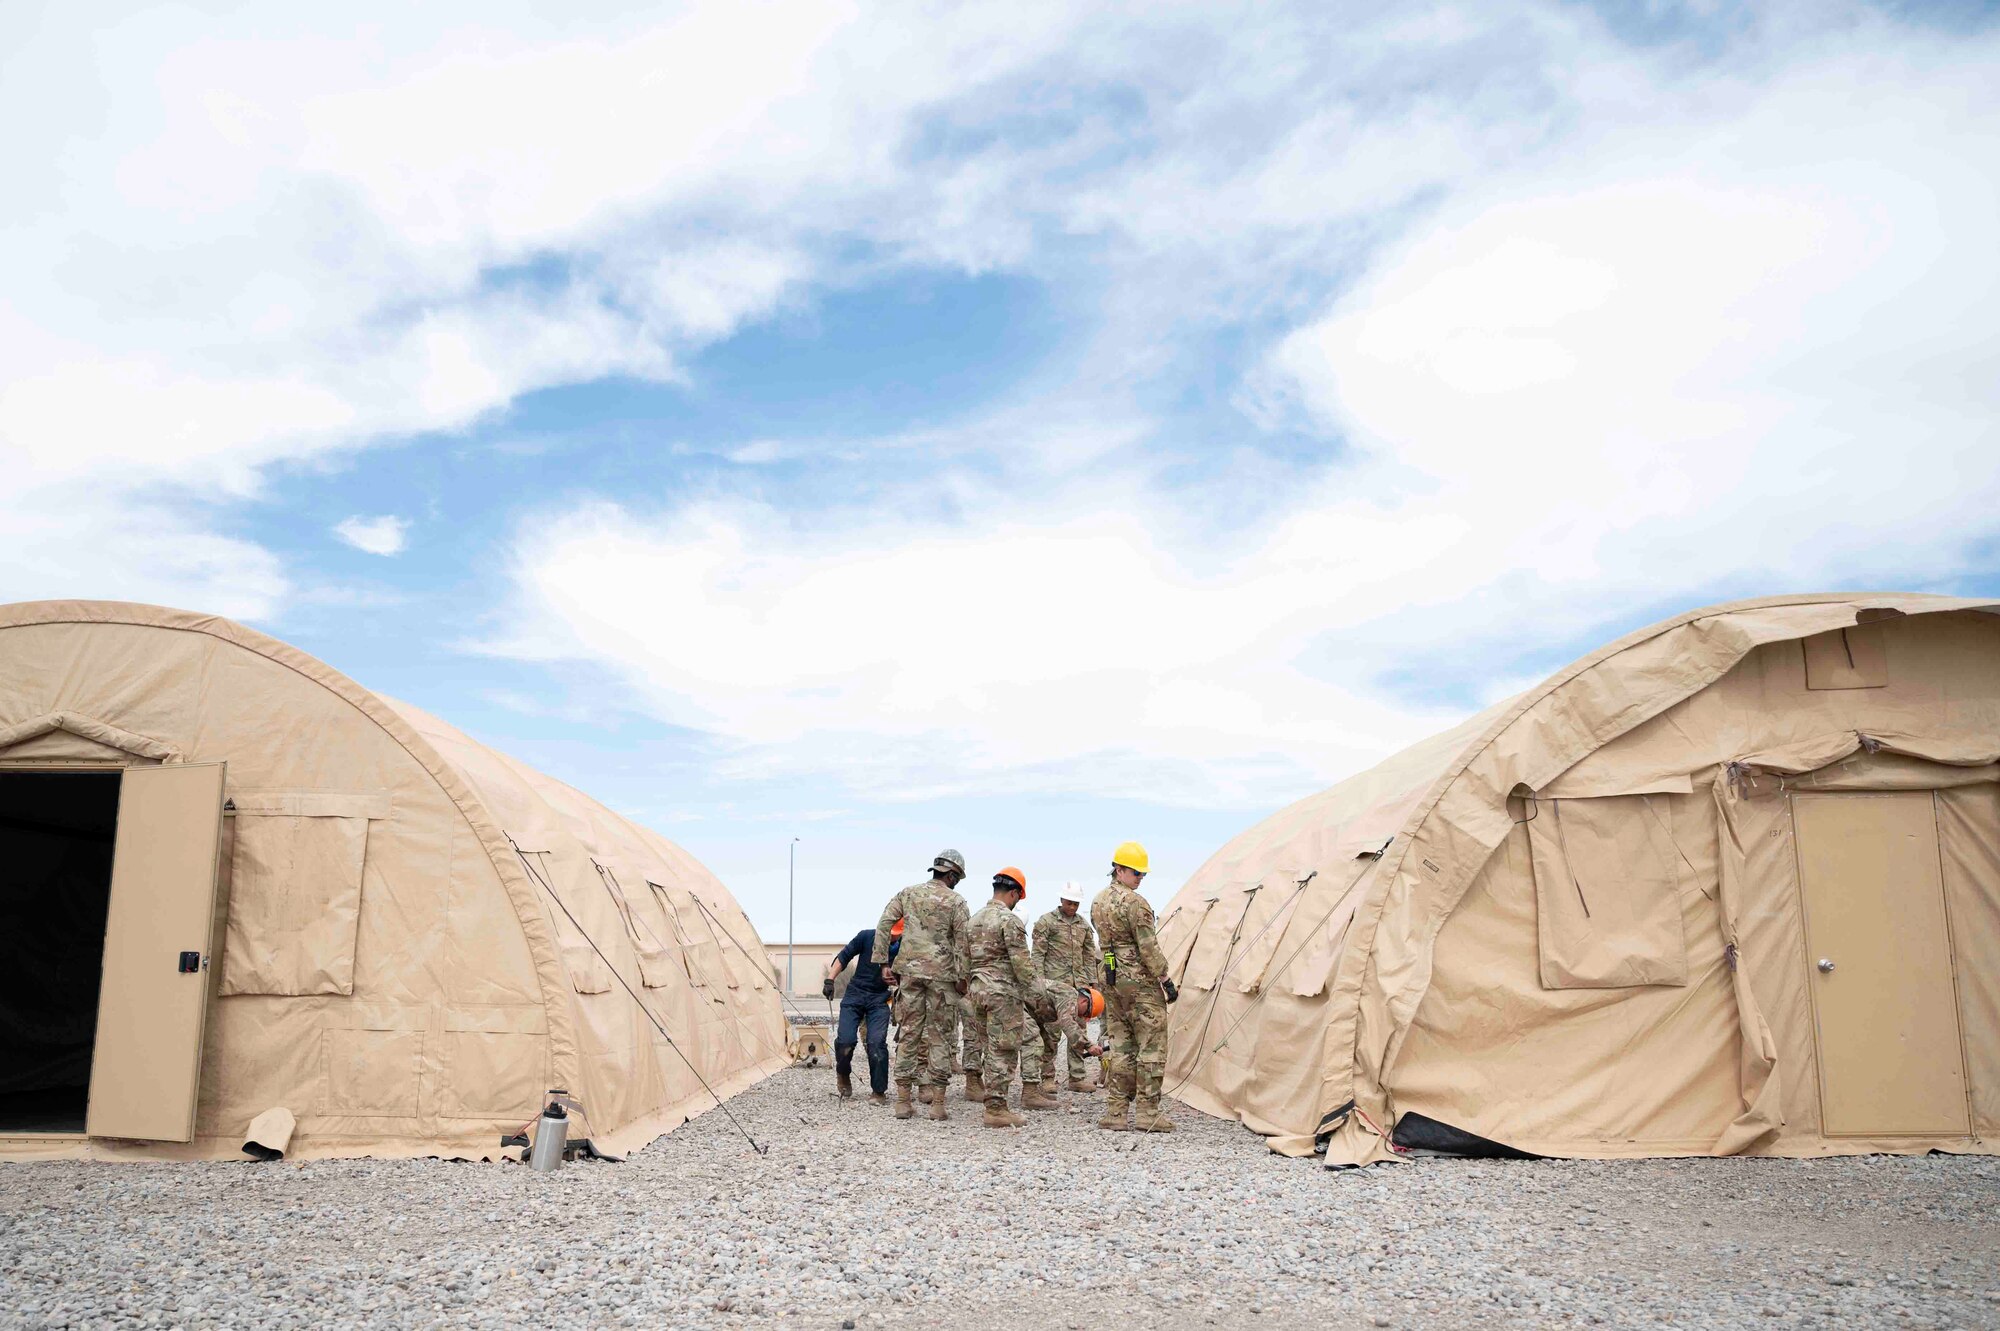 49th CES conducts deployment training exercise - Operation Stampede